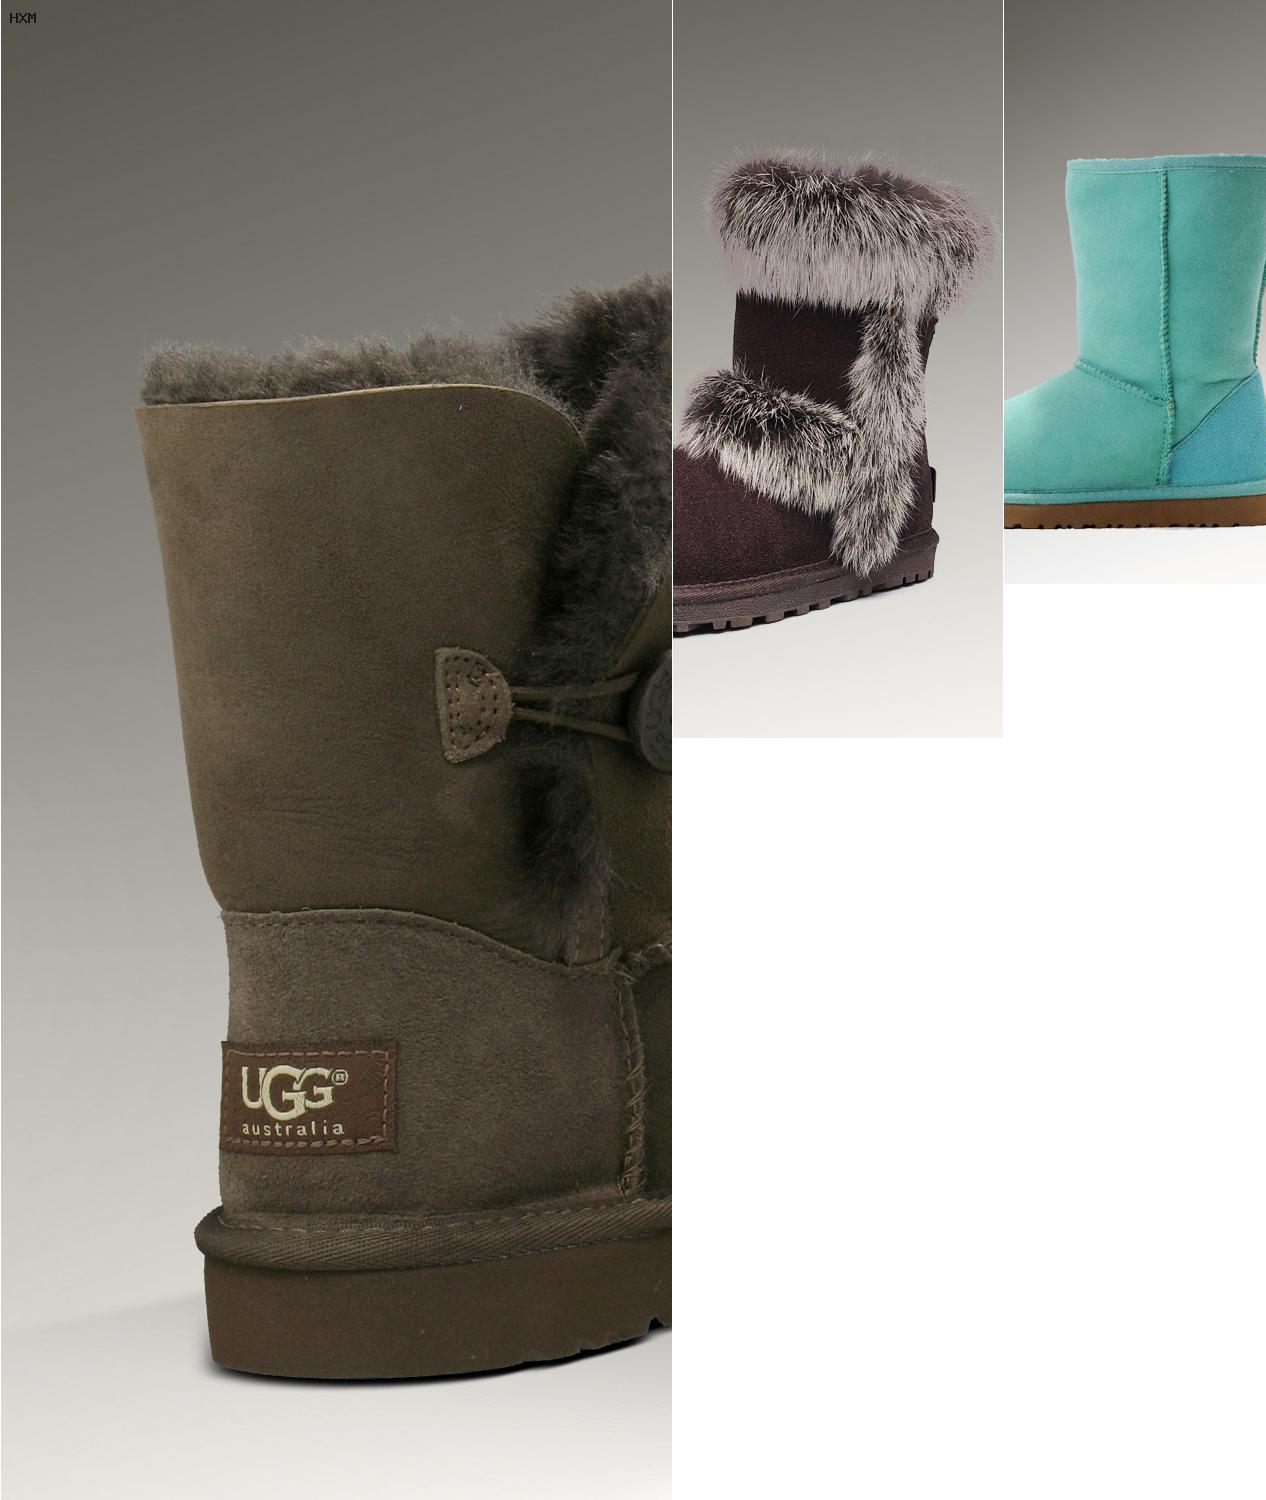 ugg boots in usa